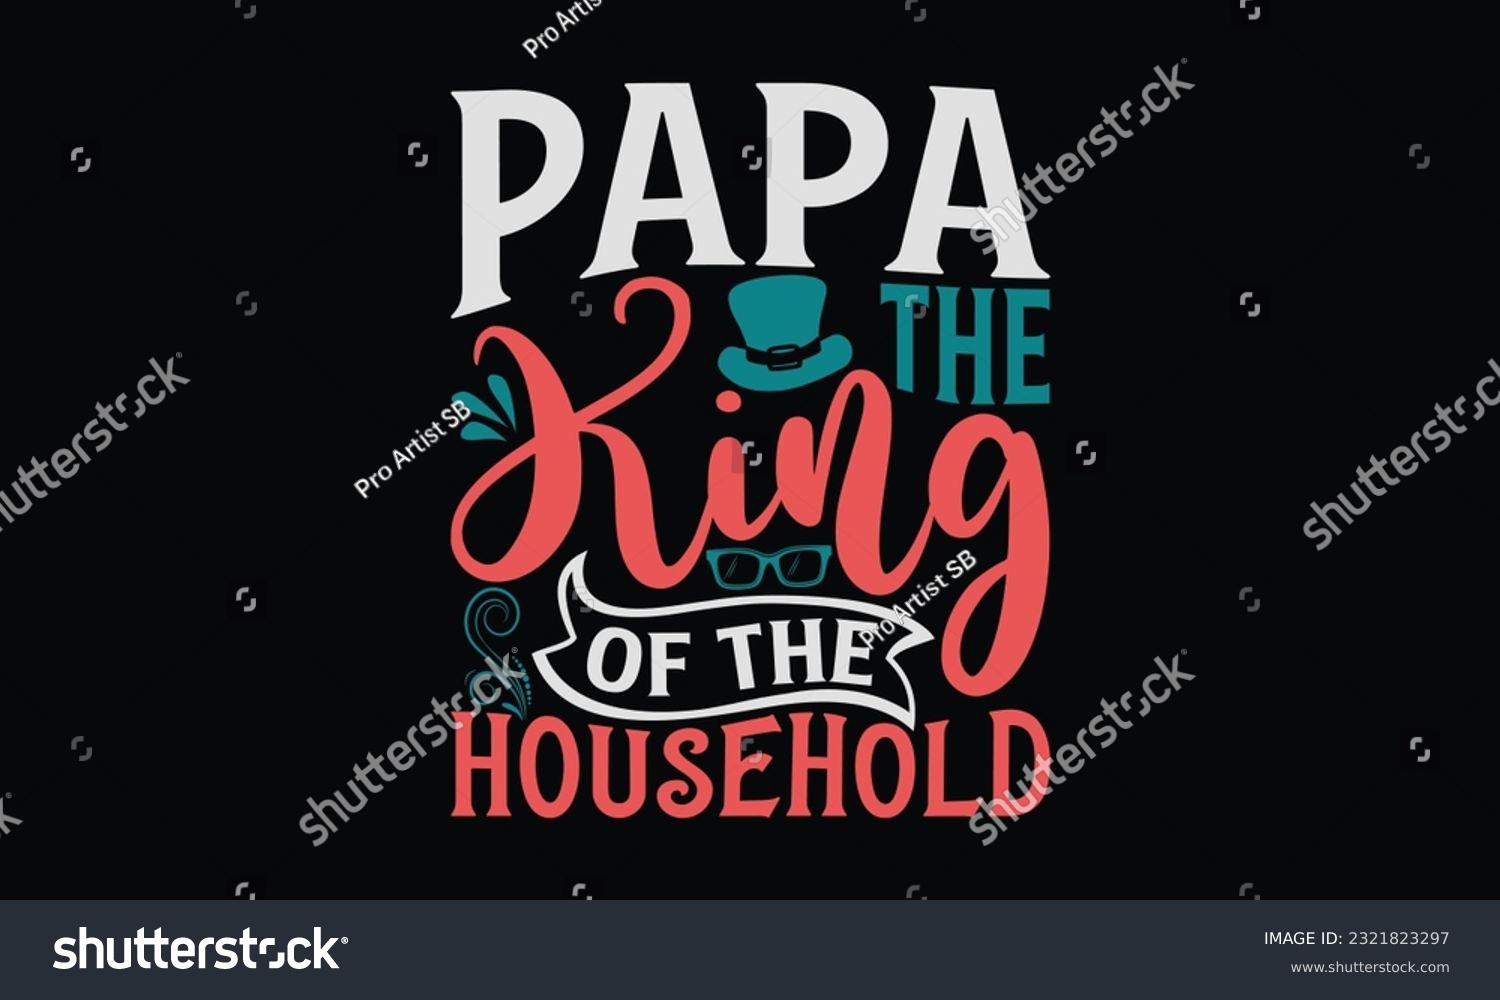 SVG of Papa The King Of The Household - Father's Day T-Shirt Design, Dad SVG Quotes, Typography Poster with Old Style Camera and Quote. svg